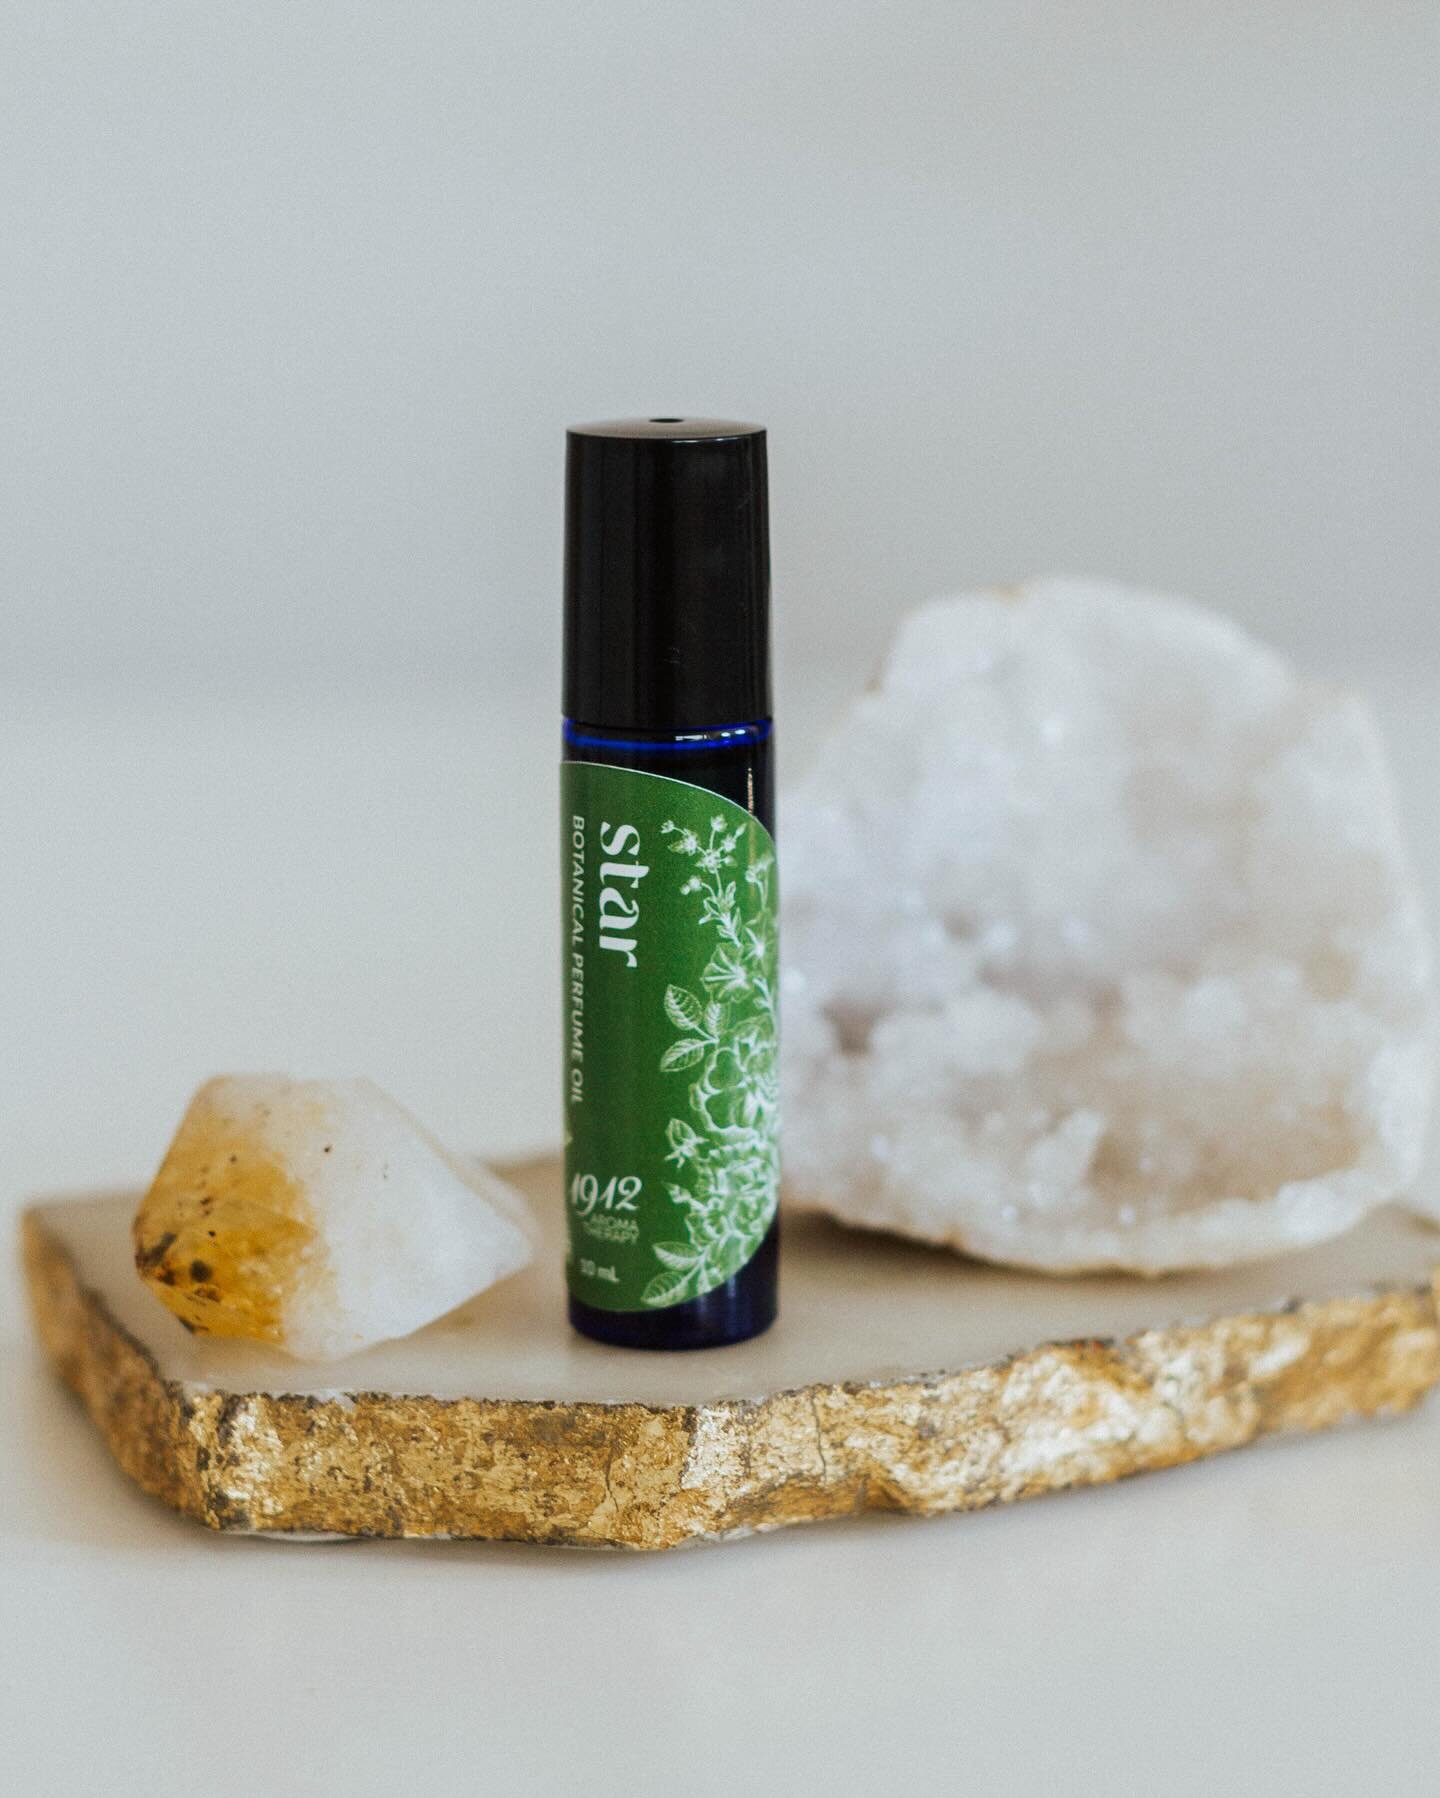 ✨ Meet STAR Organic Perfume Oil ✨

Embrace the magic of emergence and expansion with STAR Organic Perfume Oil, and let your inner light shine bright like the stars above. 🌟 

🌿 Scent Profile: Experience the freshness of new twigs, the uplifting ess